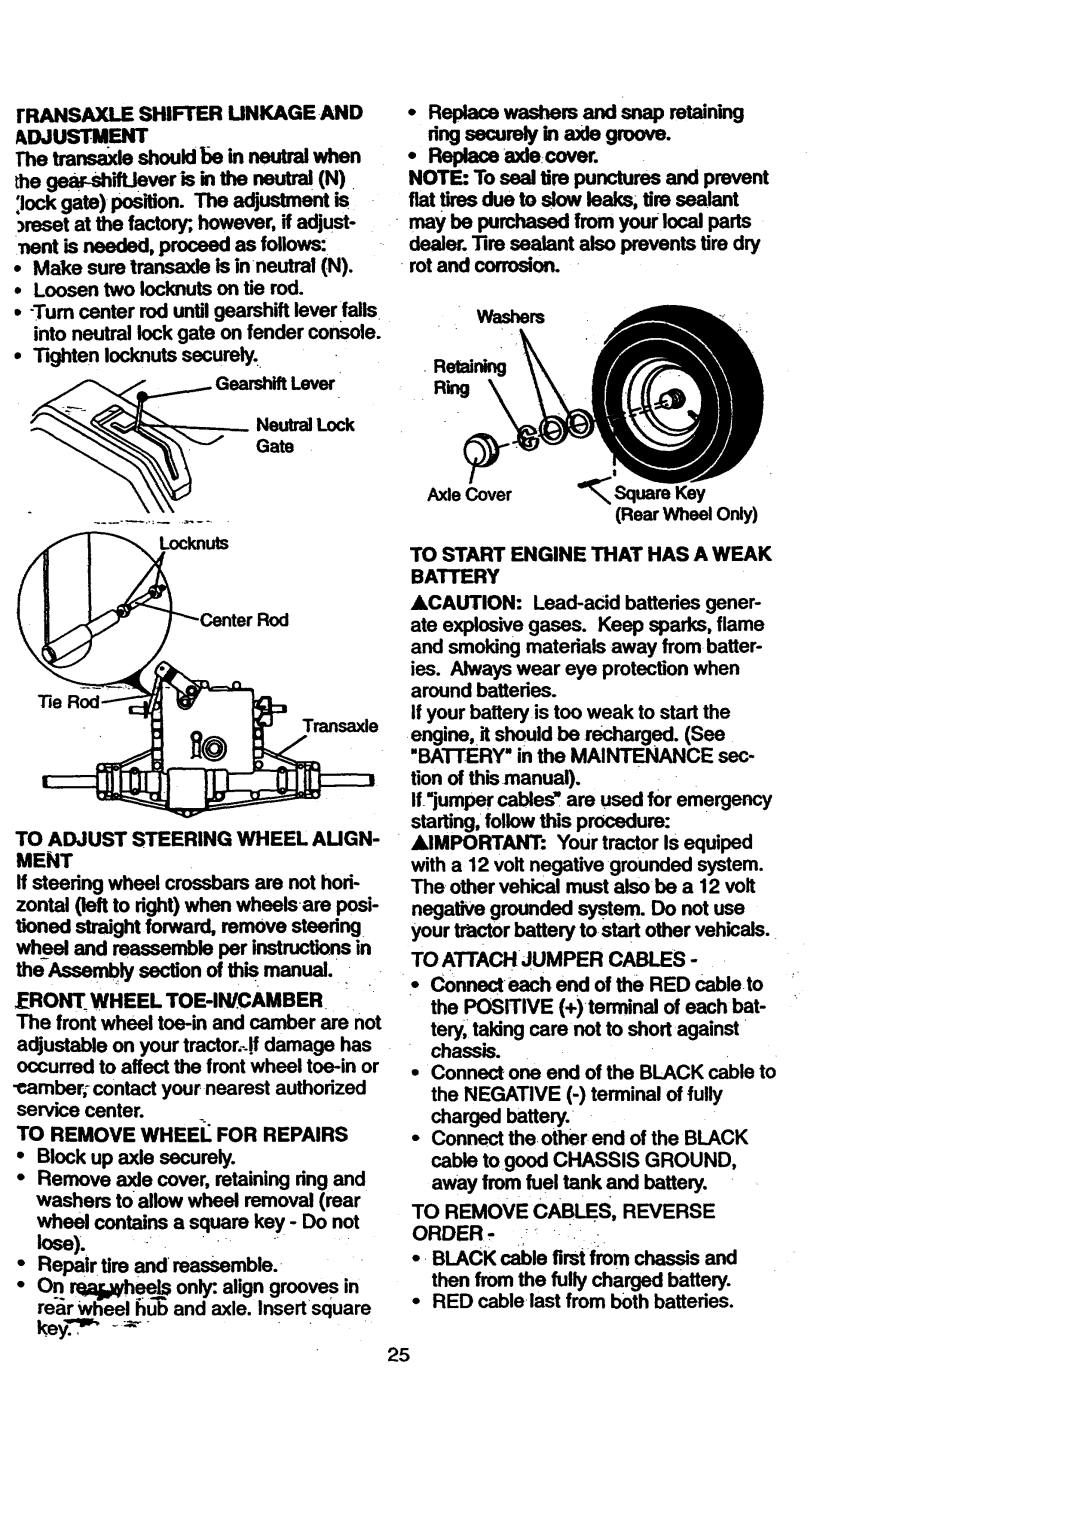 Craftsman 917.270711 owner manual lose, •Replaceaxlecover, the-Assemblysectionof this manual, ringsecurelyin axle groove 